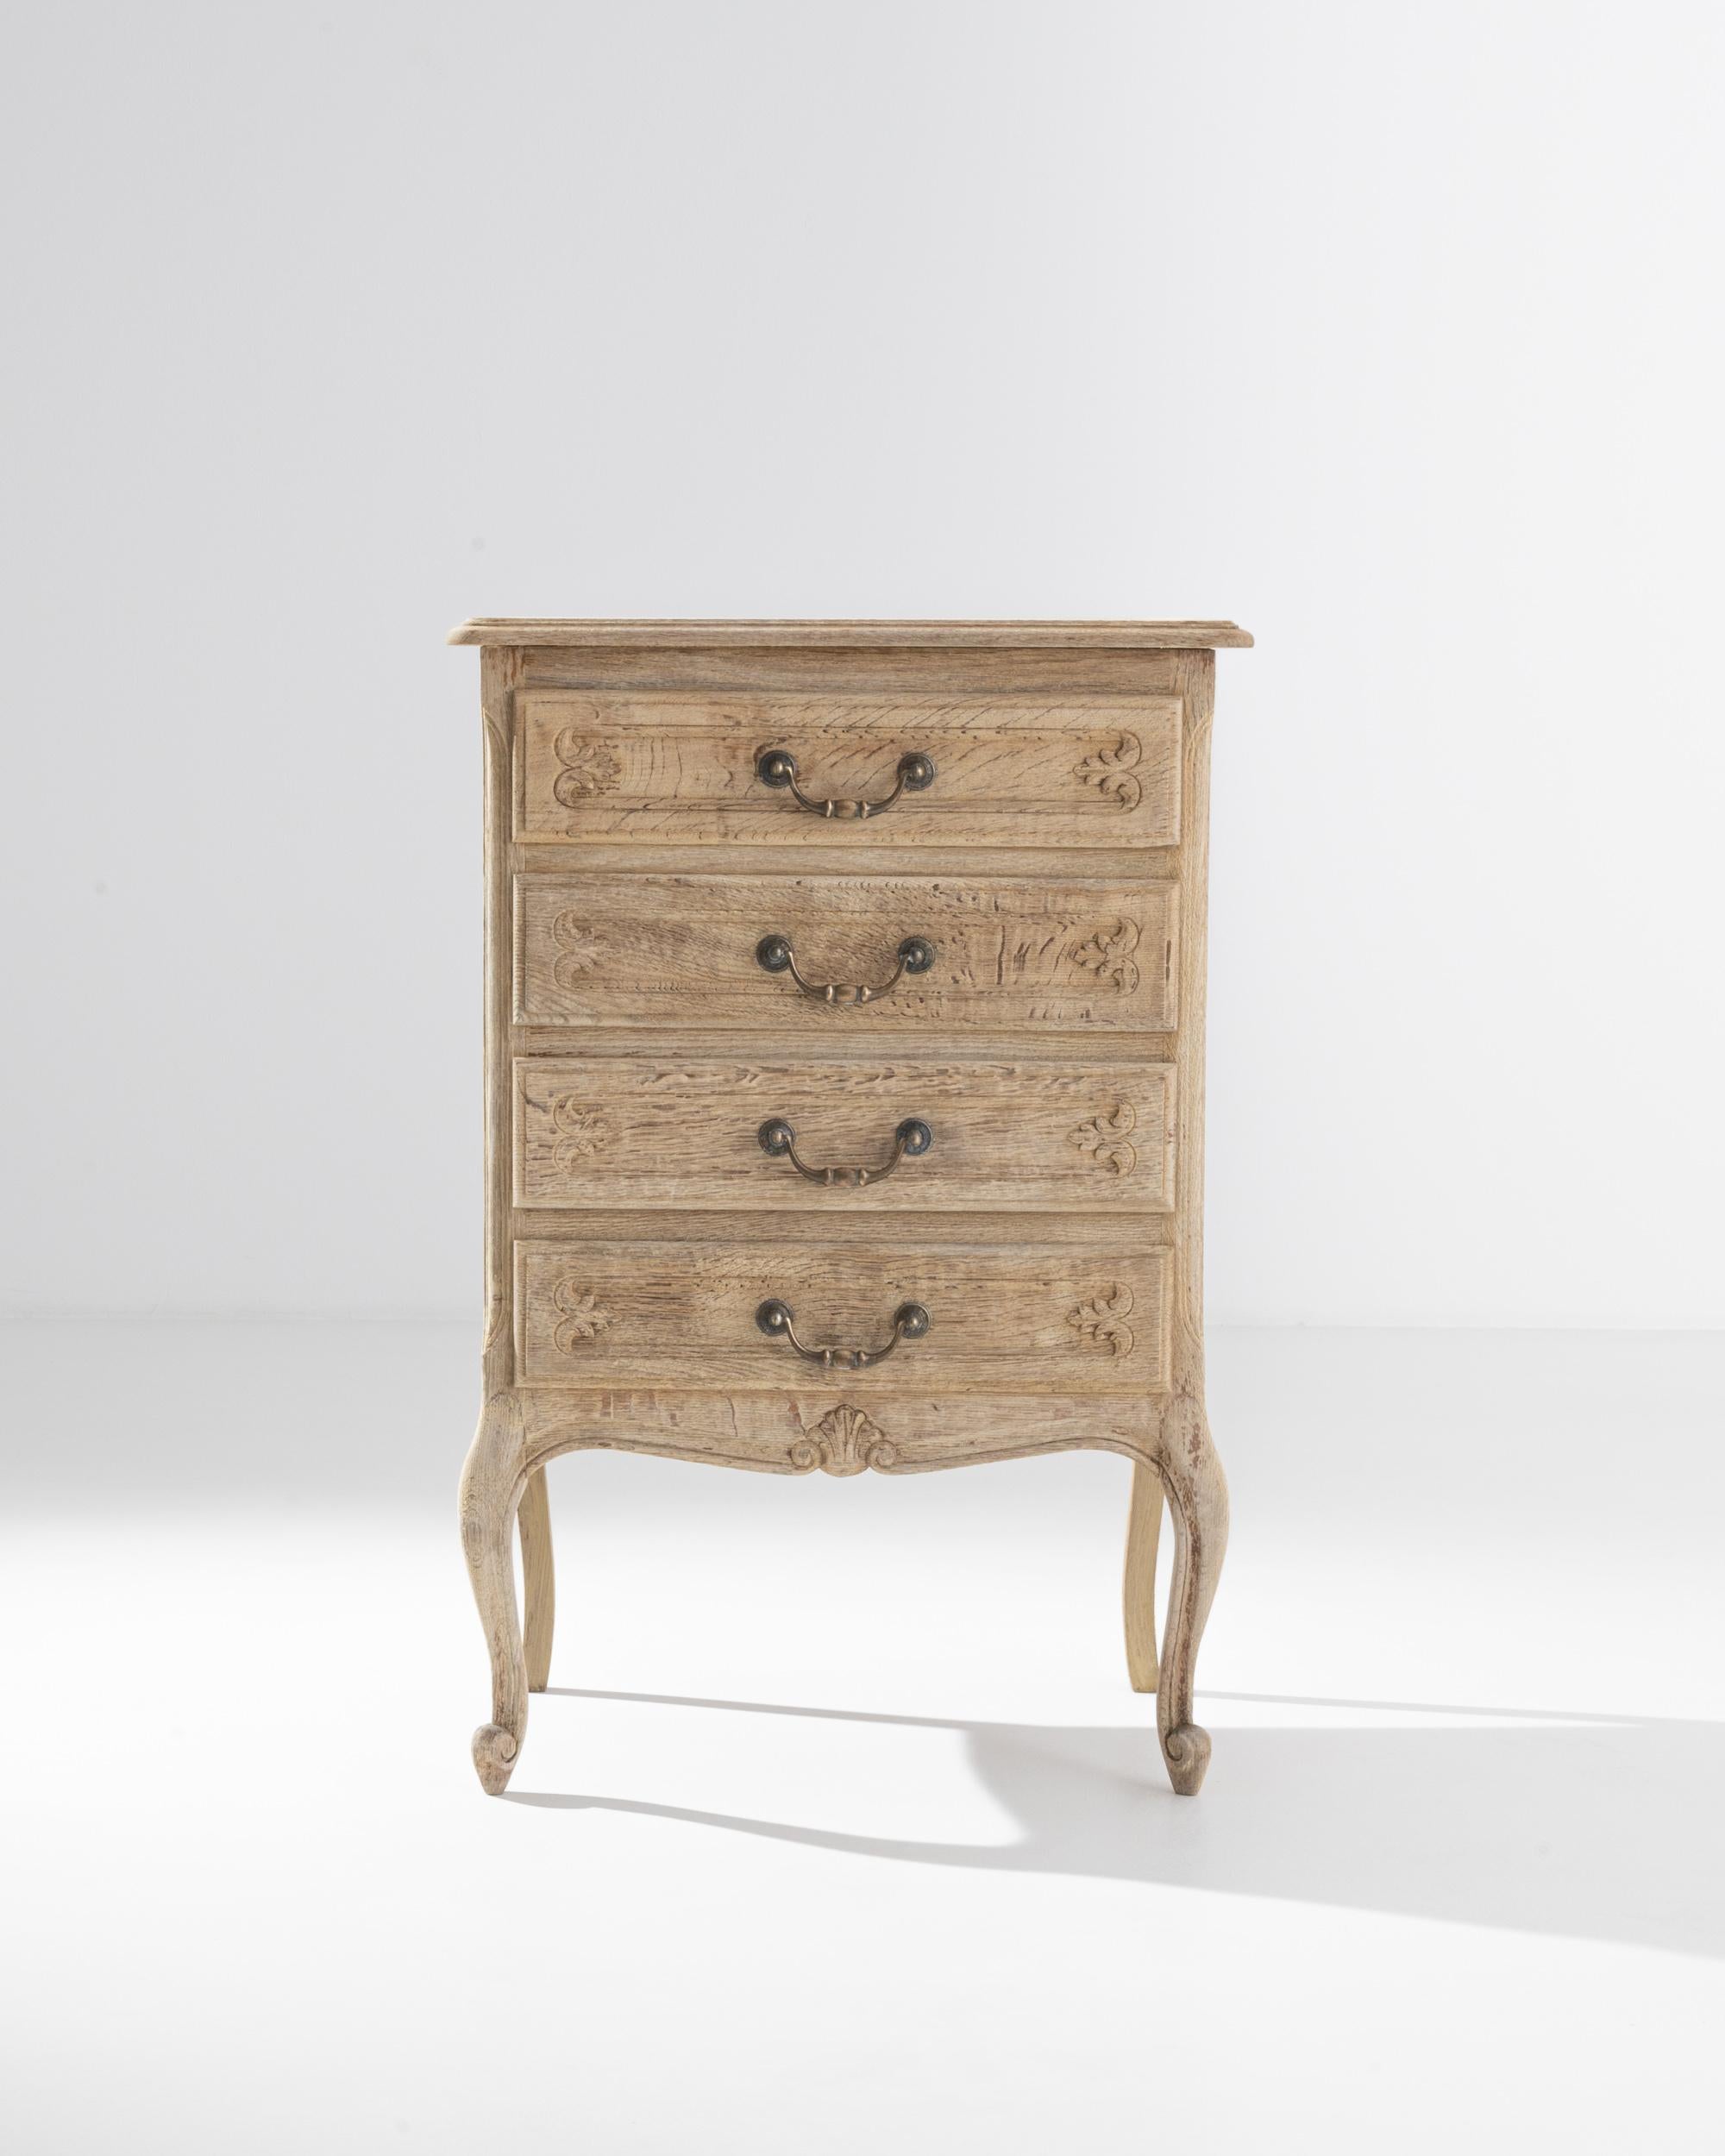 A 20th century bleached oak chest of drawers made in France. Four top-down drawers flanked by animatedly curved legs shape this handsome set of drawers. Scroll and leaf-patterned enlays, combined with sharp metal drawer handles, craft a dutiful